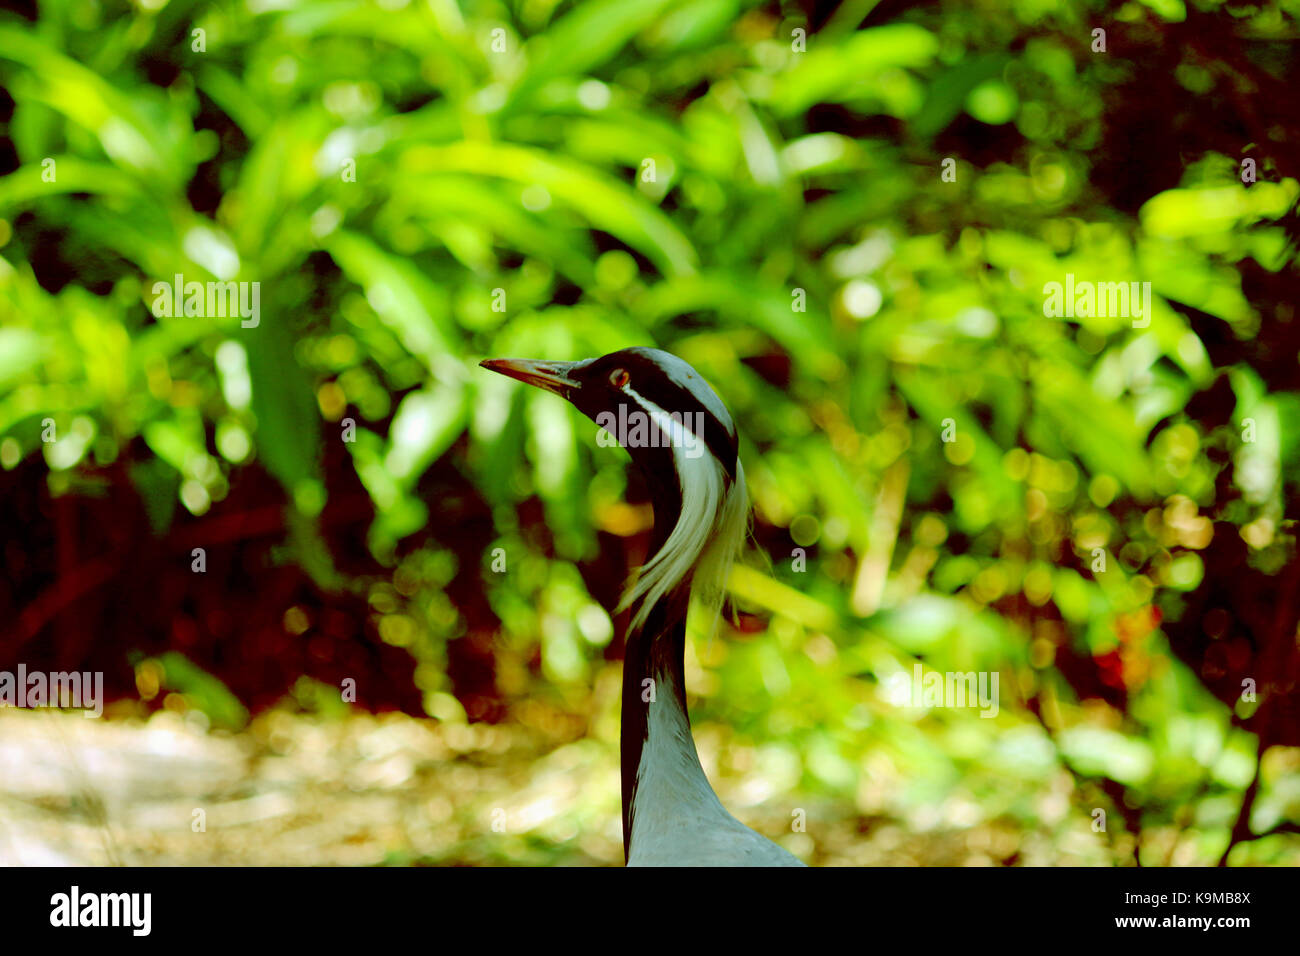 Demoiselle crane in its natural habitat with green leafy background. Stock Photo